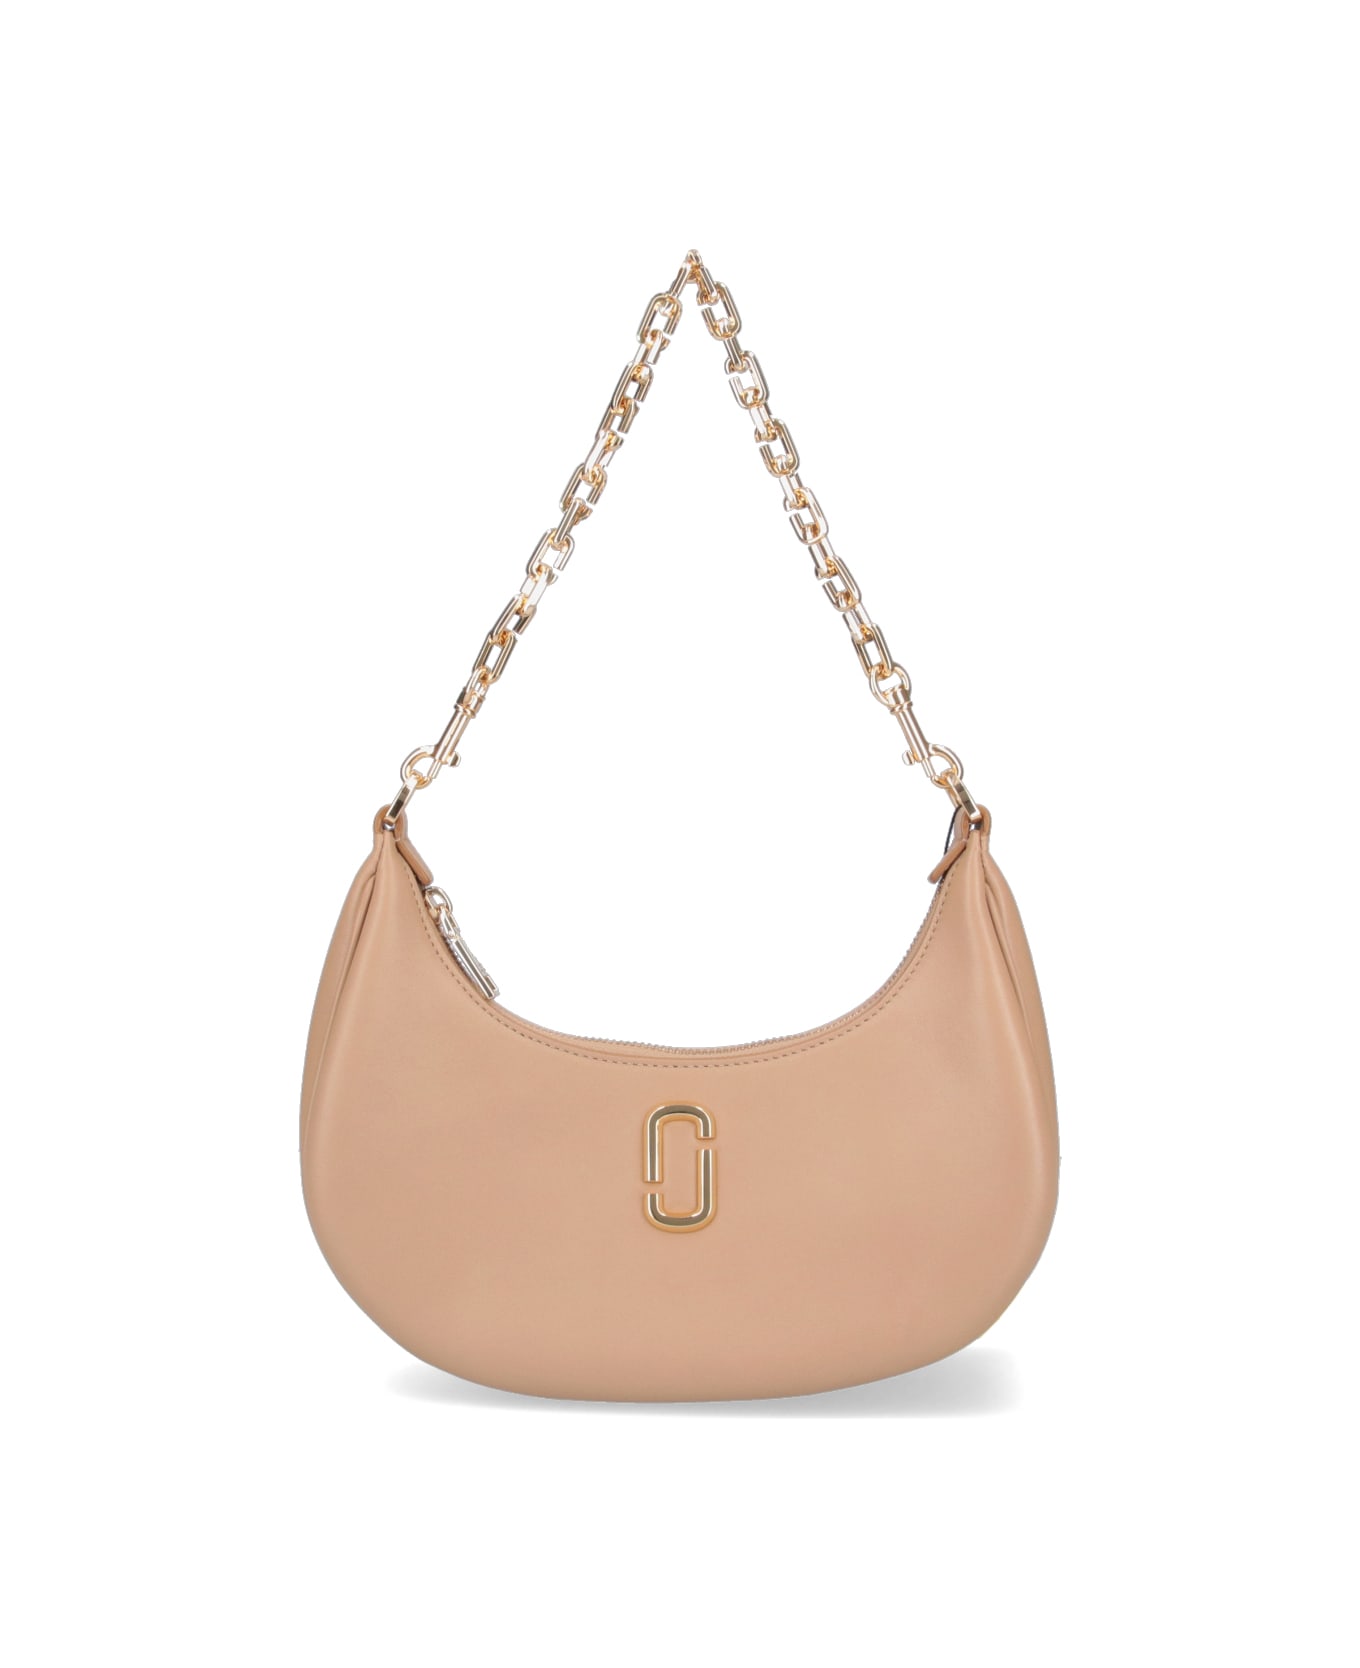 Marc Jacobs The Small Curve Bag - Camel トートバッグ